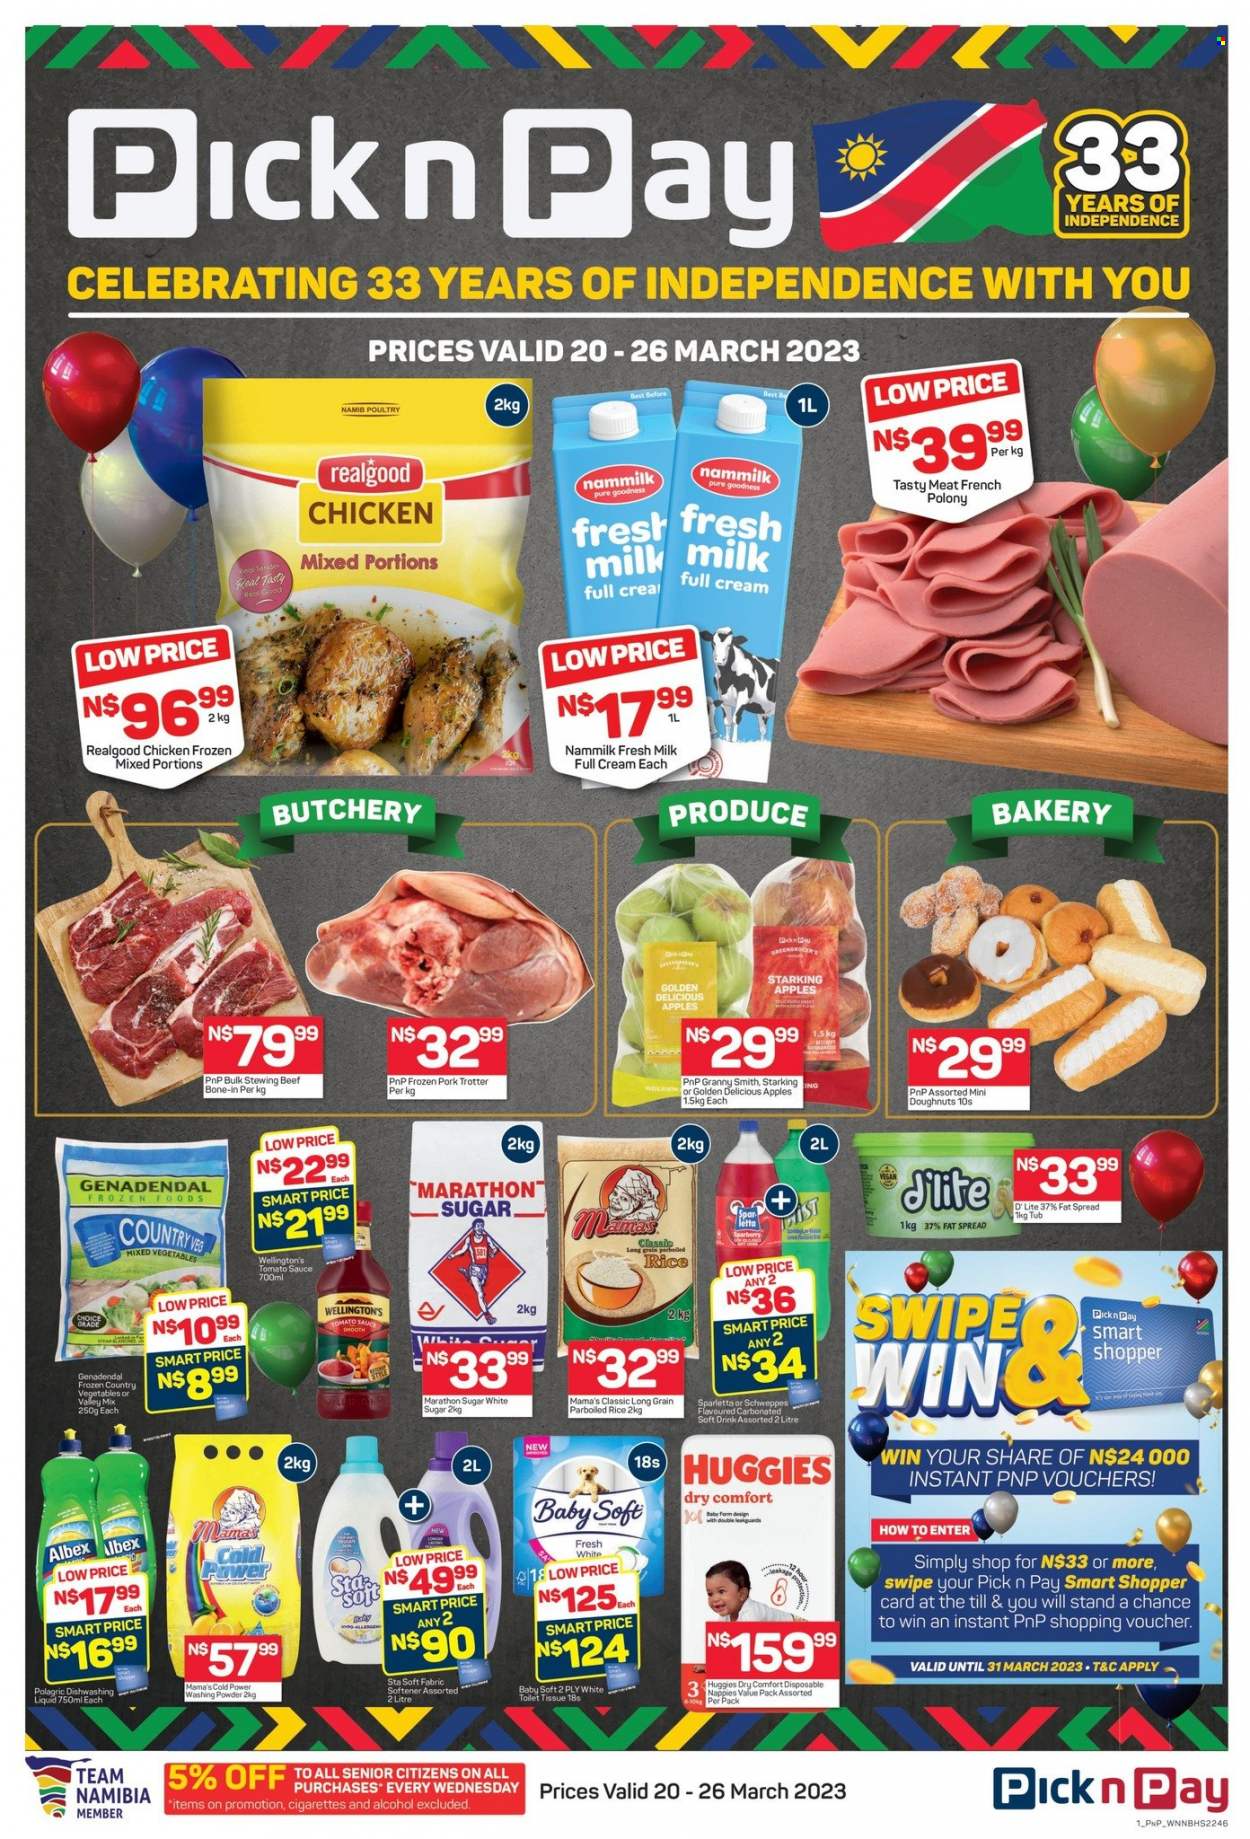 thumbnail - Pick n Pay catalogue  - 20/03/2023 - 26/03/2023 - Sales products - donut, Golden Delicious, Granny Smith, Mama's, french polony, polony, milk, fat spread, mixed vegetables, sugar, rice, parboiled rice, Schweppes, soft drink, carbonated soft drink, alcohol, Sol, chicken, beef meat, stewing beef, Huggies, Baby Soft, fabric softener, laundry powder, dishwashing liquid, beef bone. Page 1.